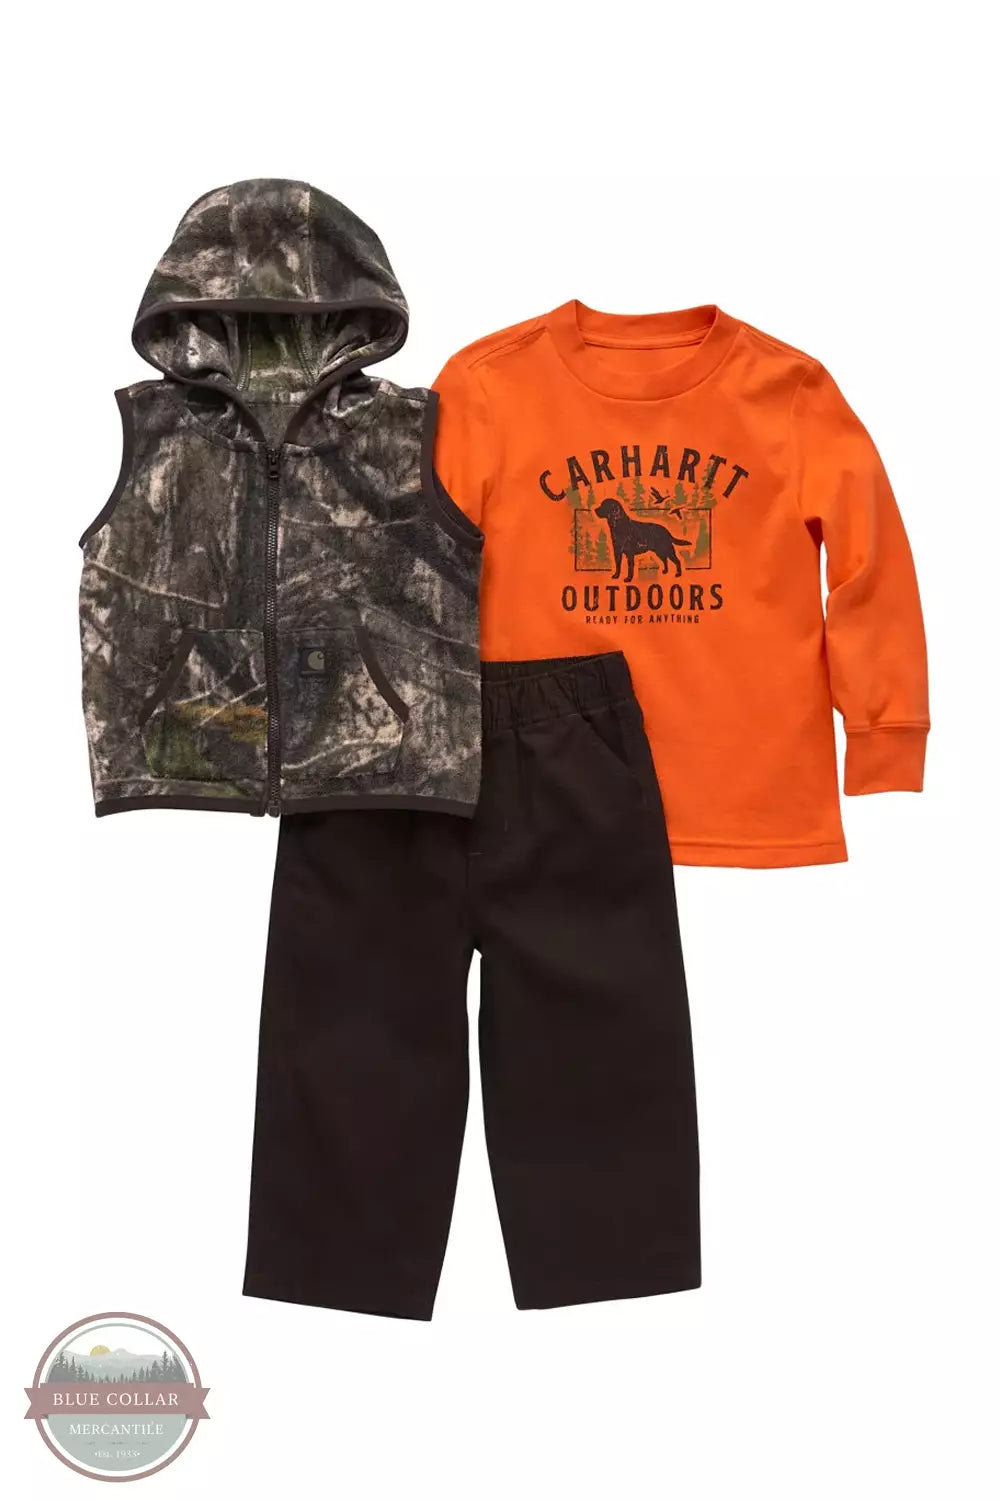 Carhartt CG8887-D17 Toddler 3-Piece Set Orange Long Sleeve Graphic T-Shirt, Camo Vest, and Canvas Pants in Mustang Brown Front View